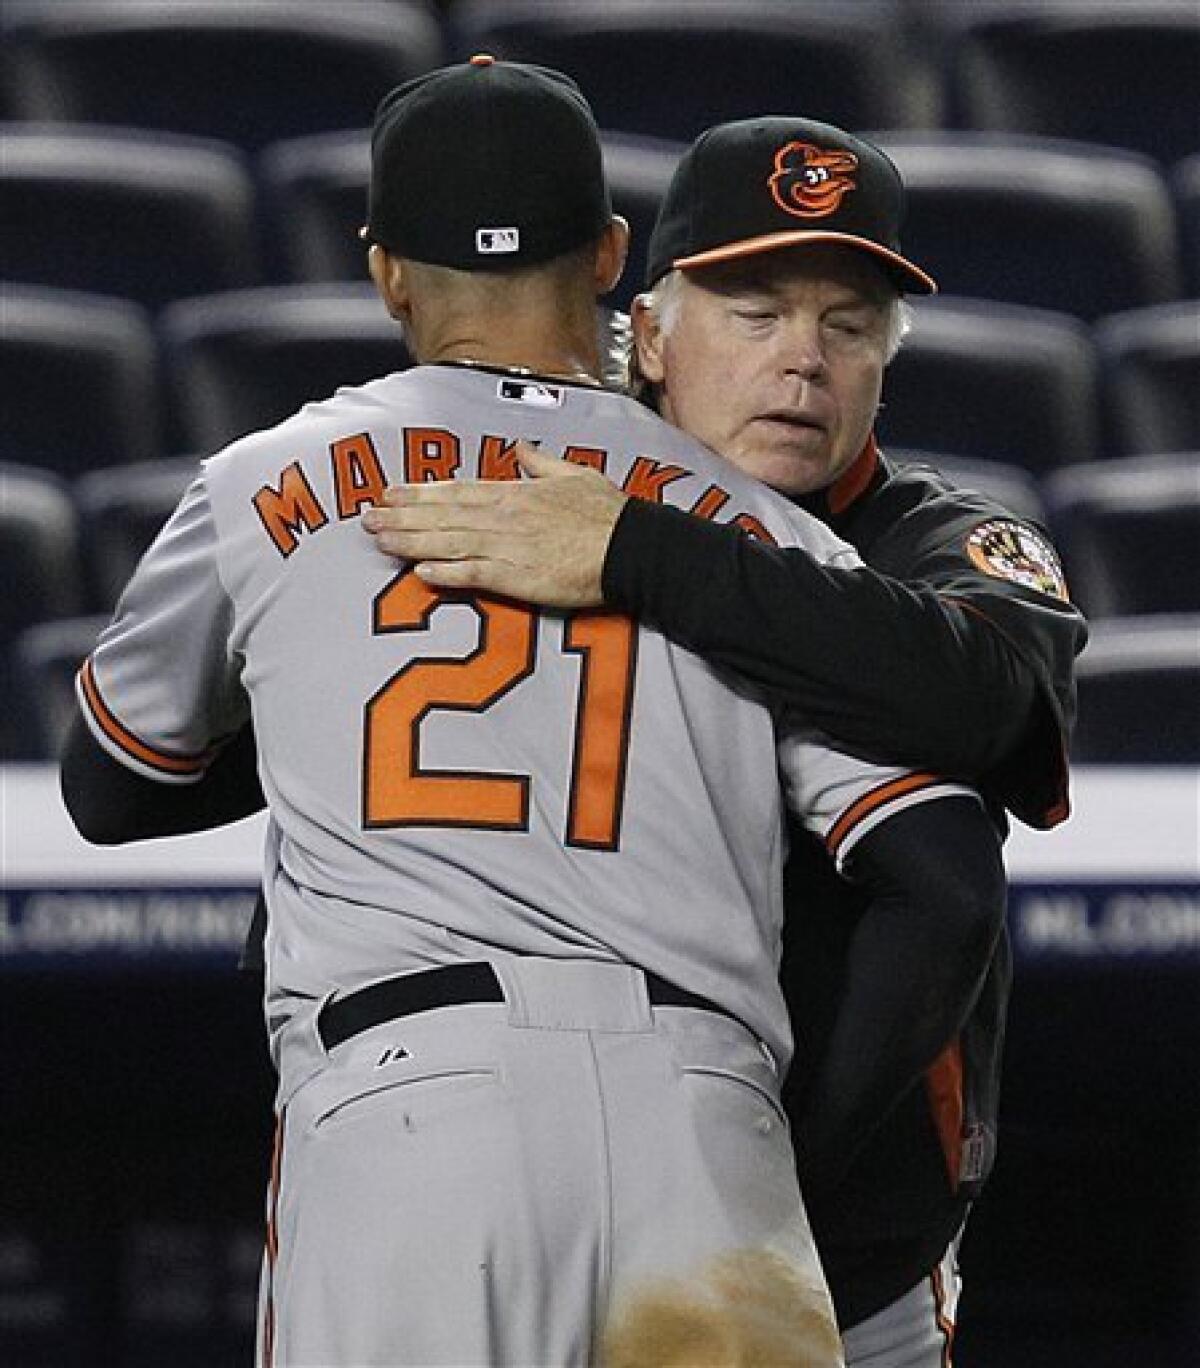 Showalter gets 1,000th win, Matusz ends skid - The San Diego Union